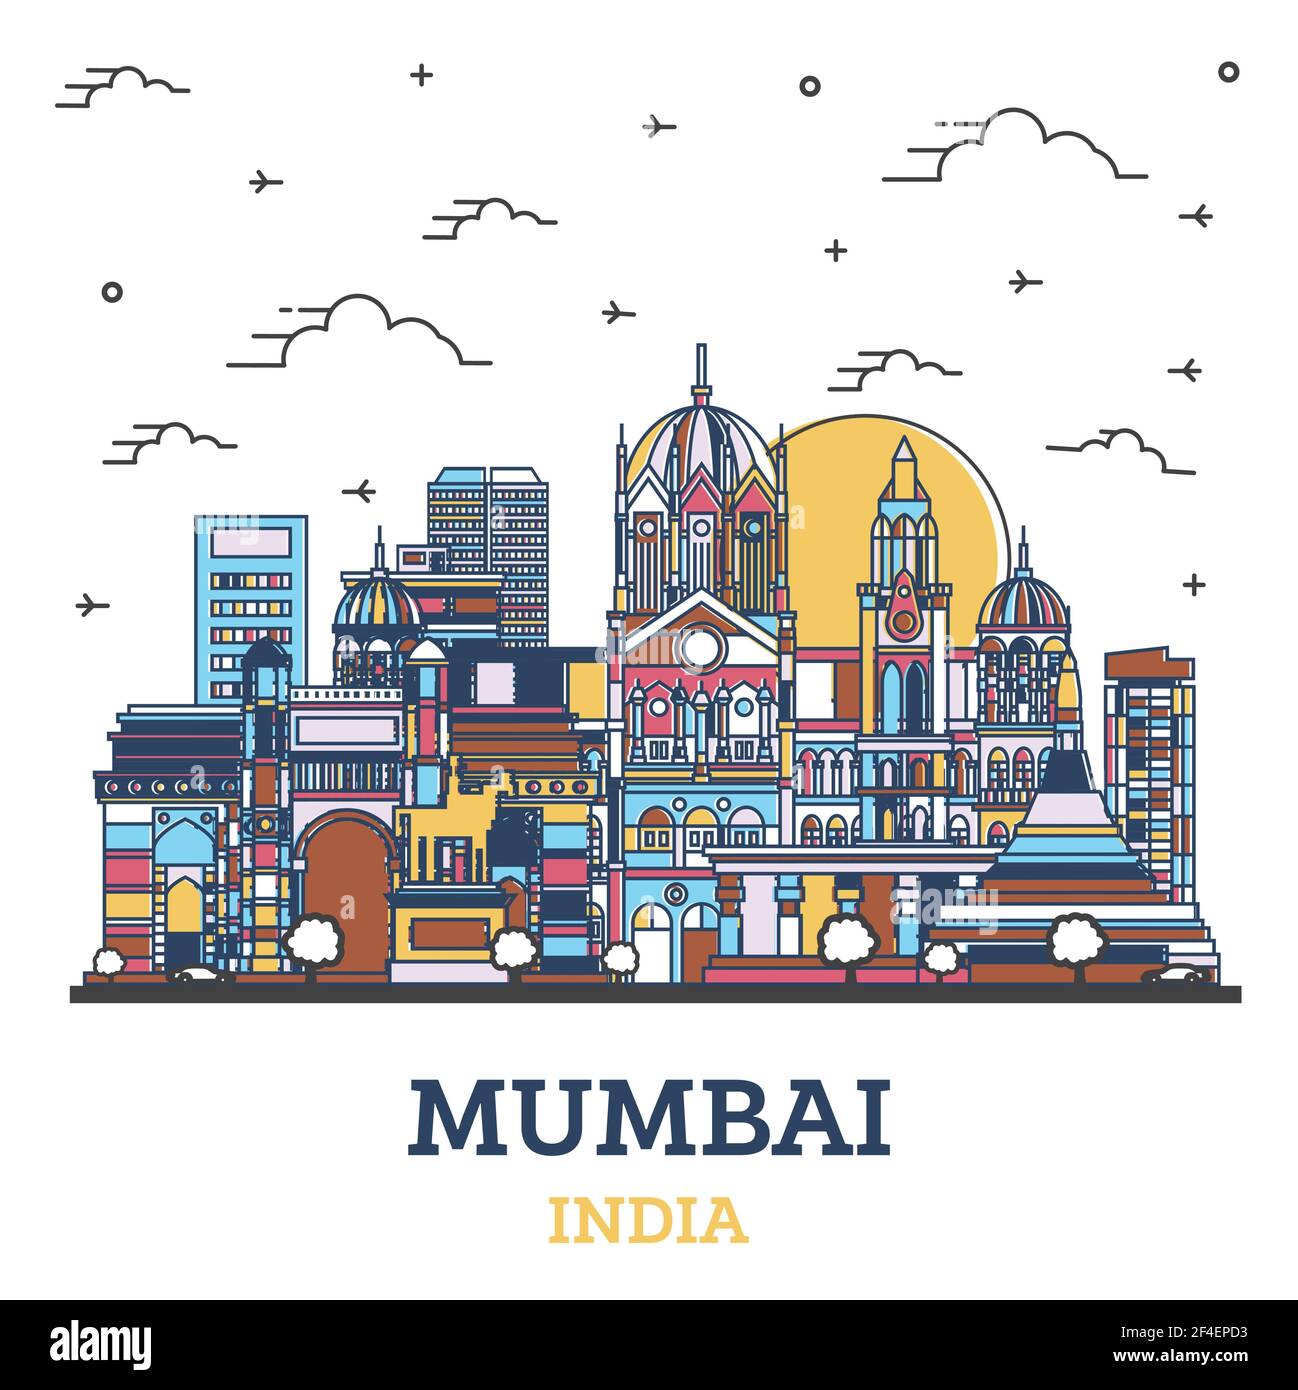 Outline Mumbai India City Skyline with Colored Historic Buildings Isolated on White. Vector Illustration. Bombay Cityscape with Landmarks. Stock Vector